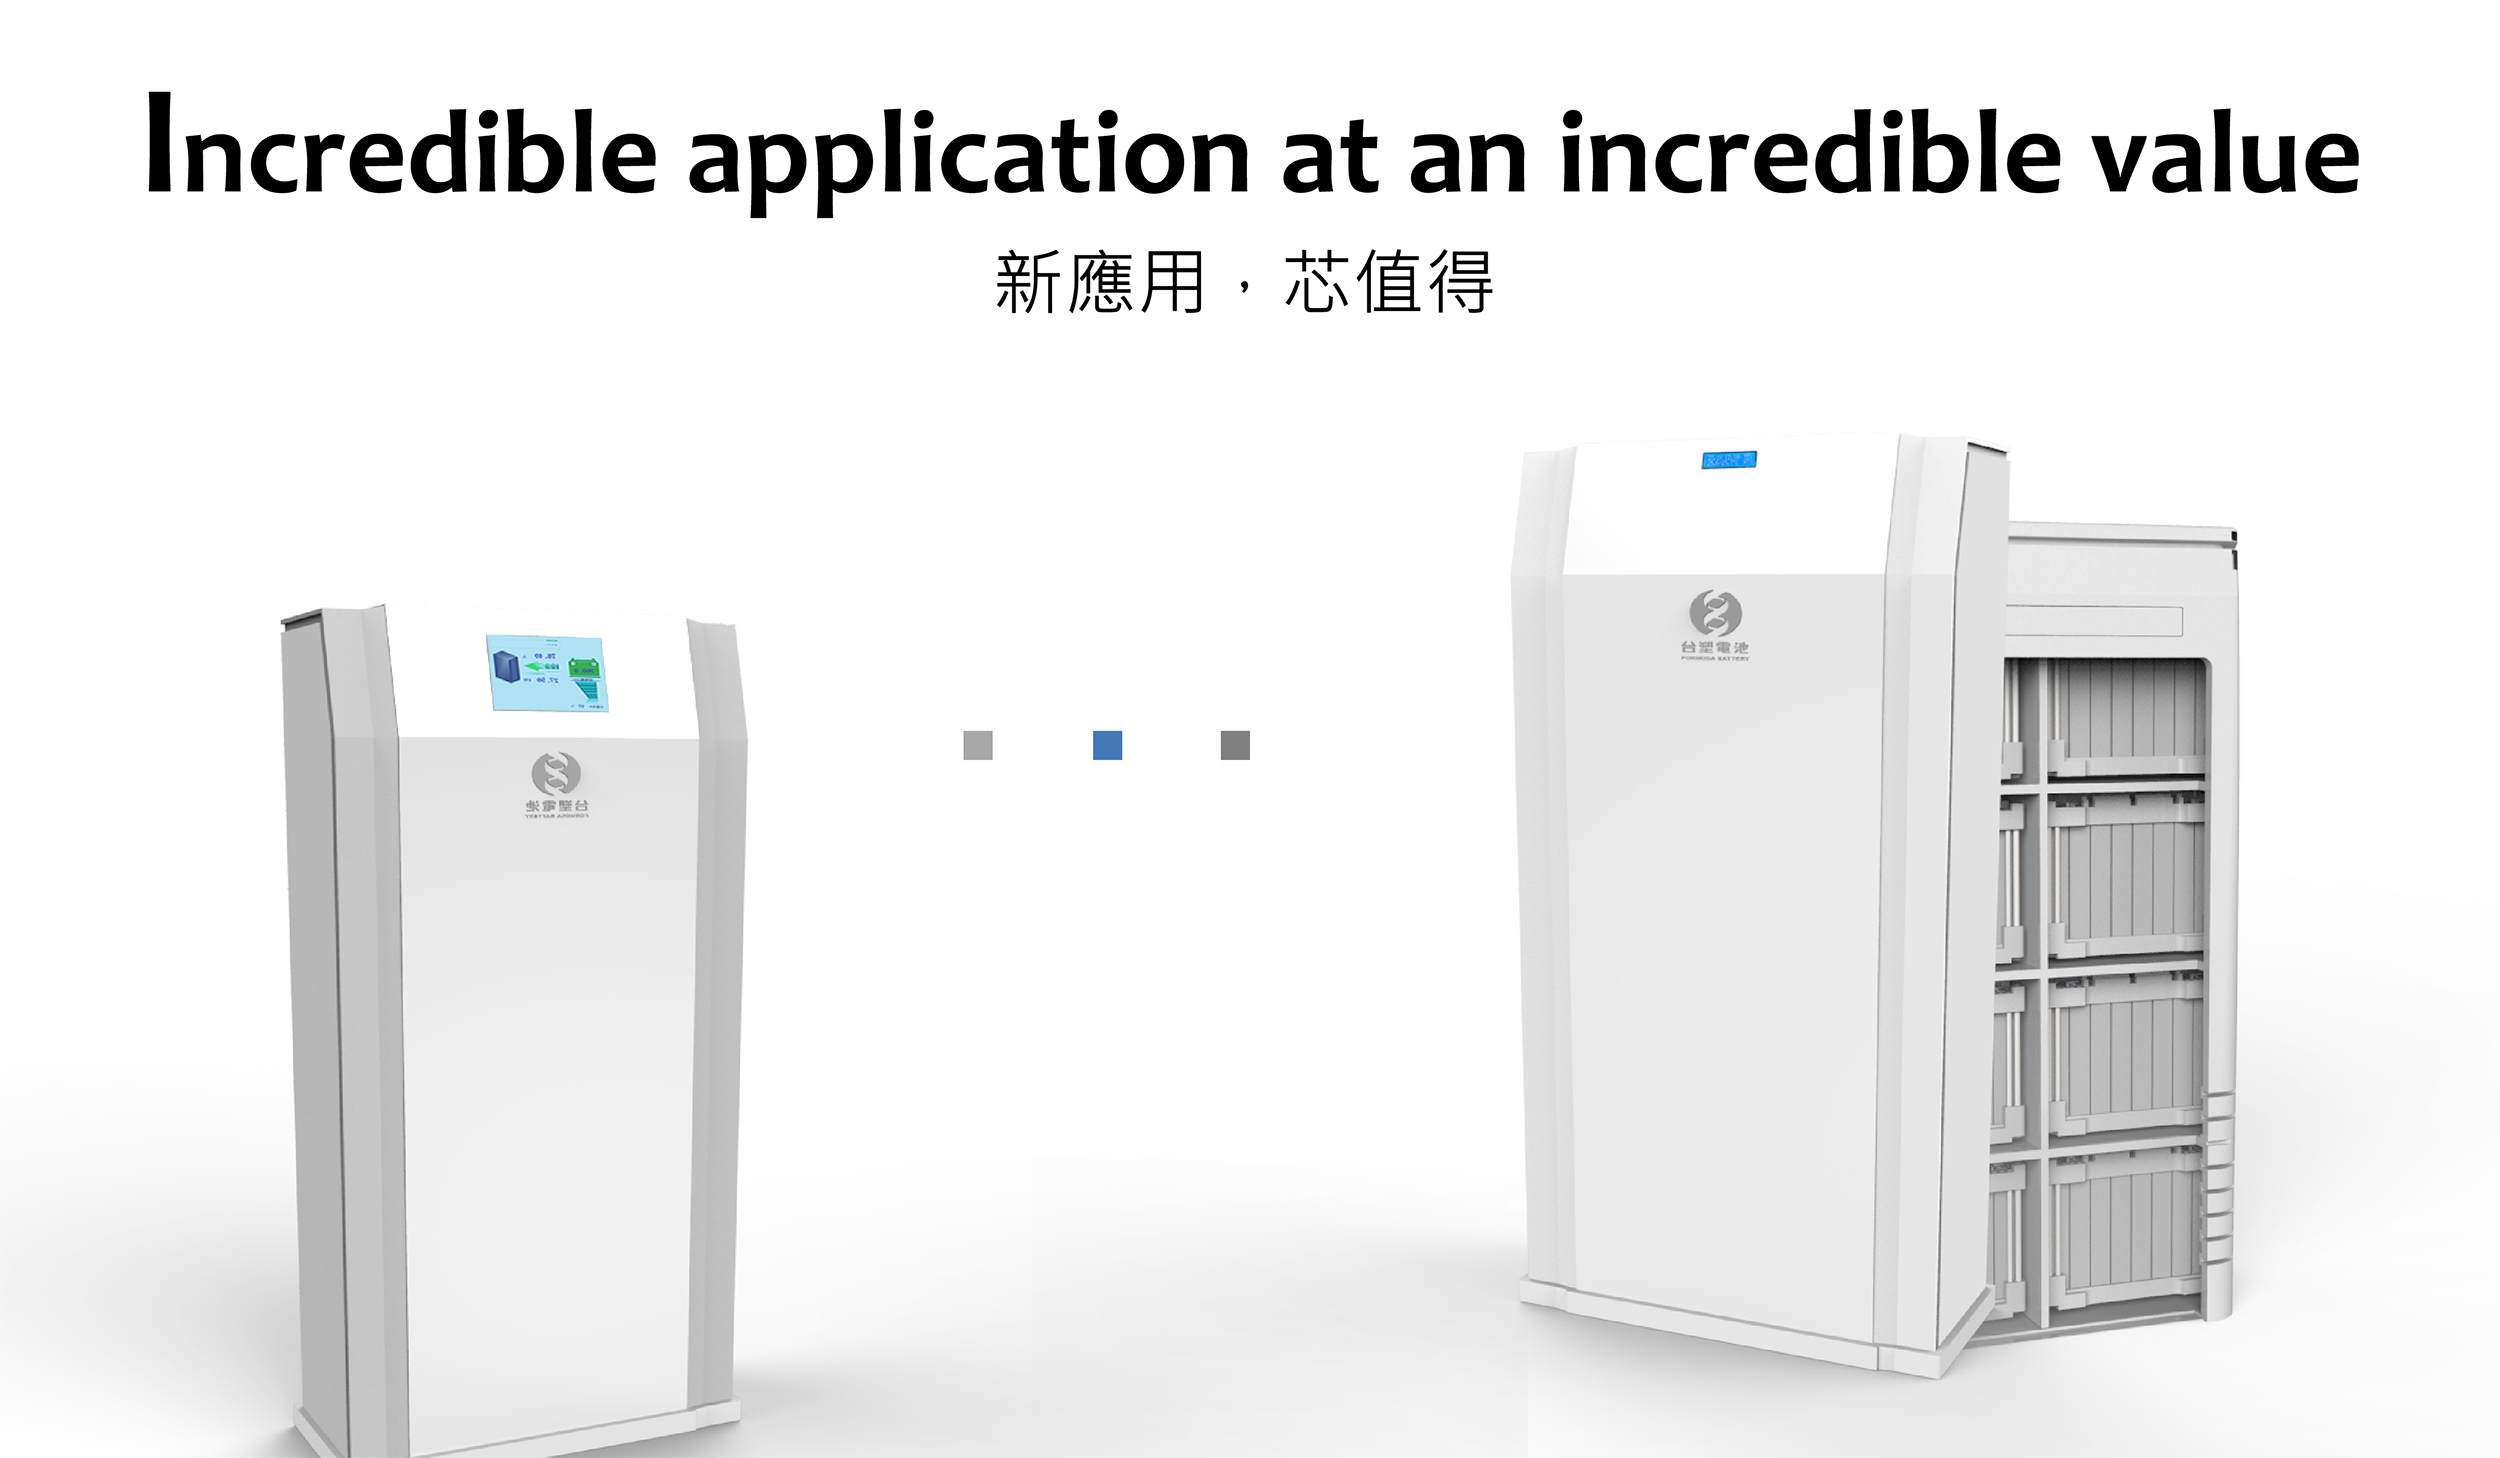 Incredible application at an incredible value.新應用，芯值得